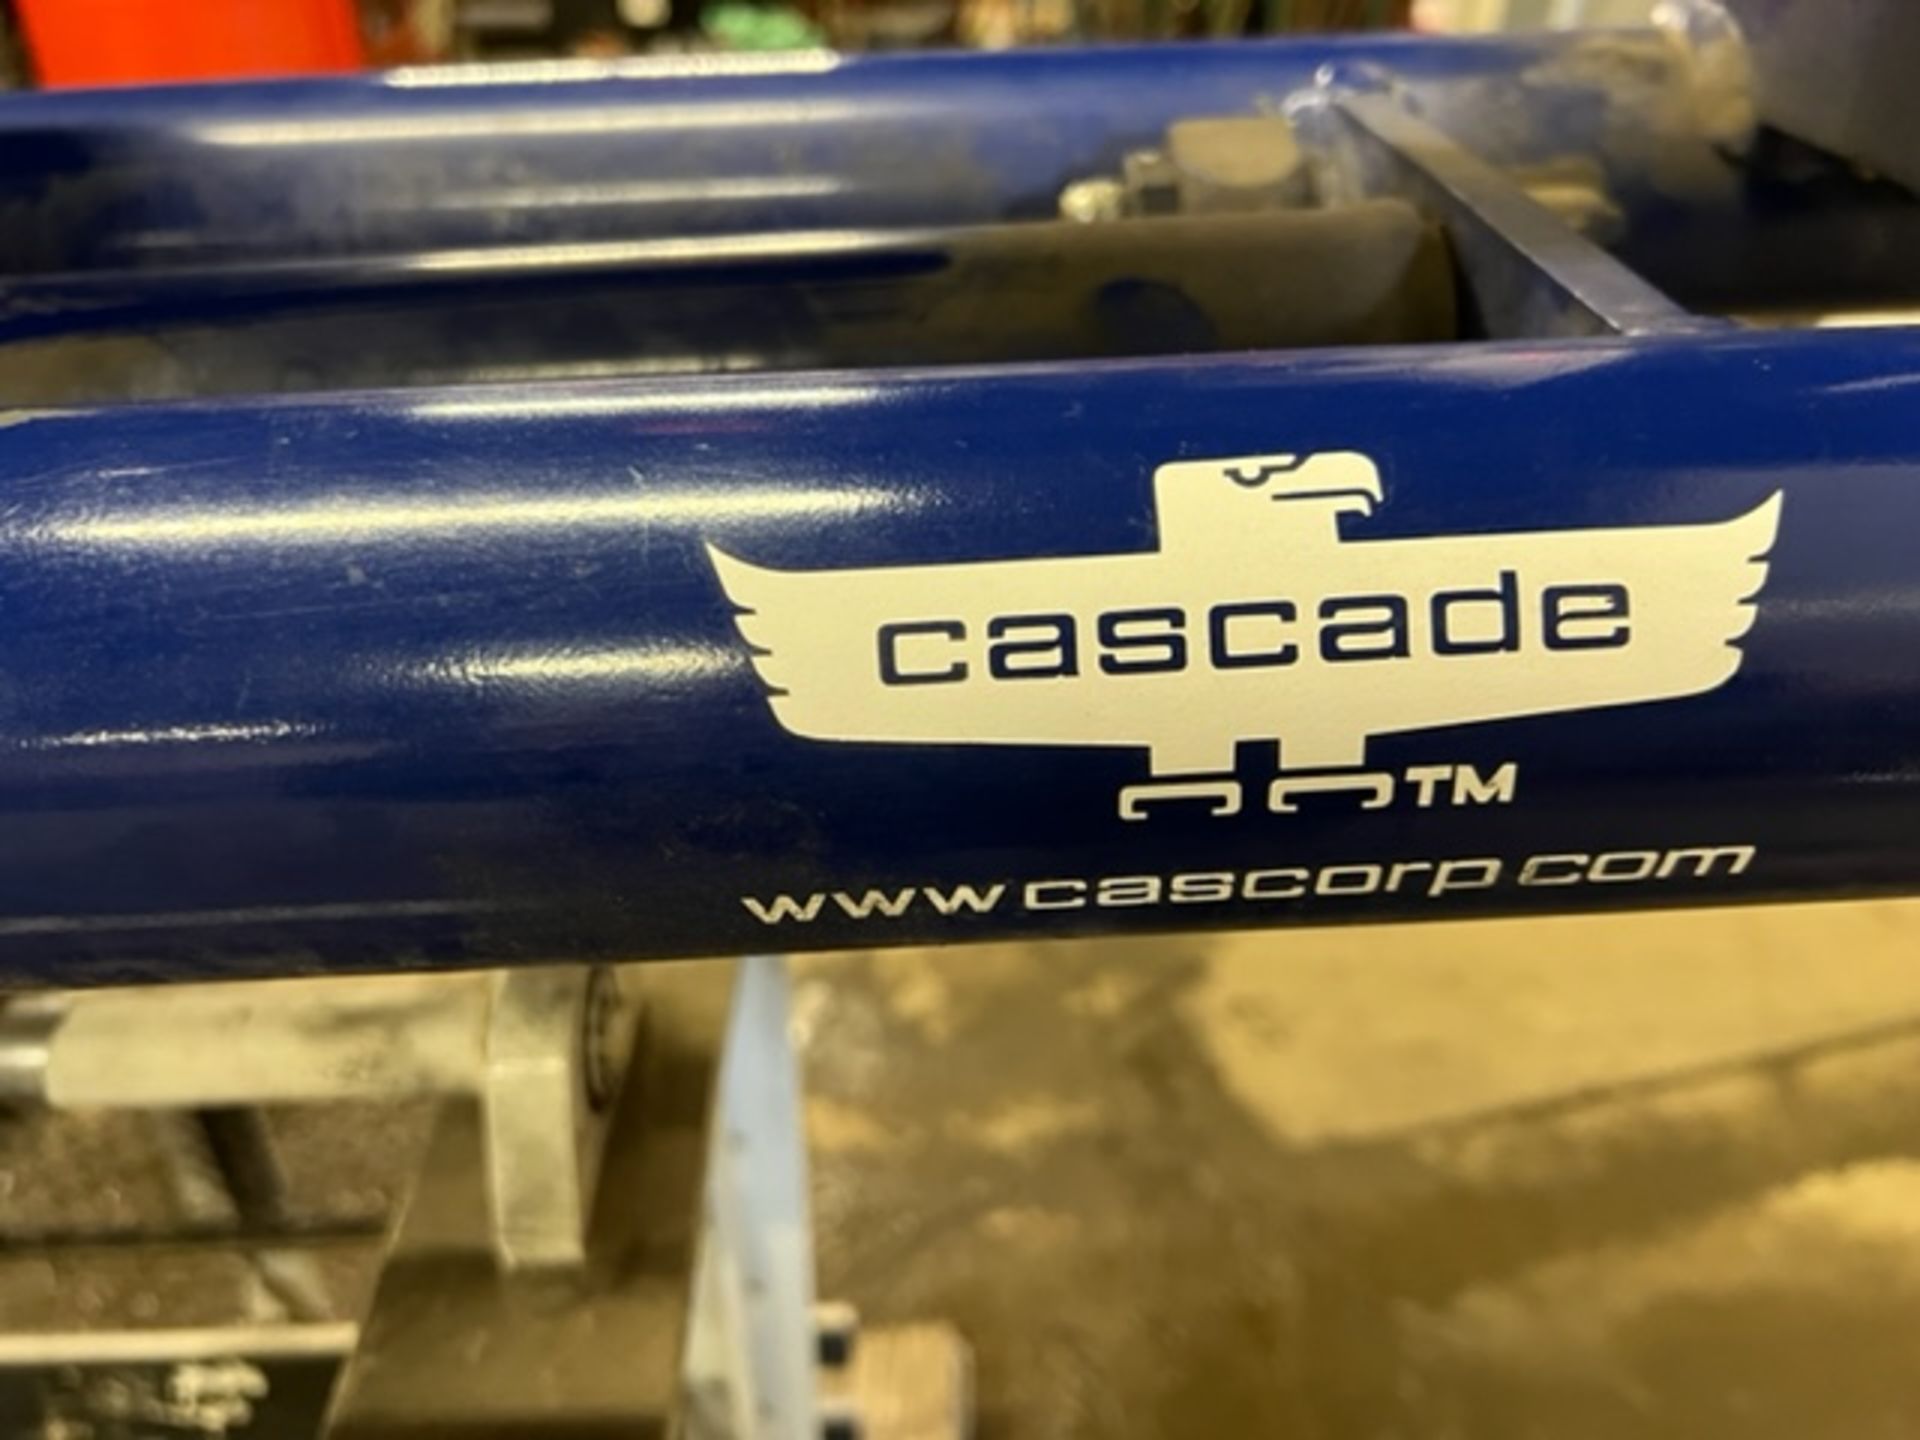 Cascade Forklift Attachment - Forklift Box Skid Grapple Clamp Unit MINT - Image 4 of 5